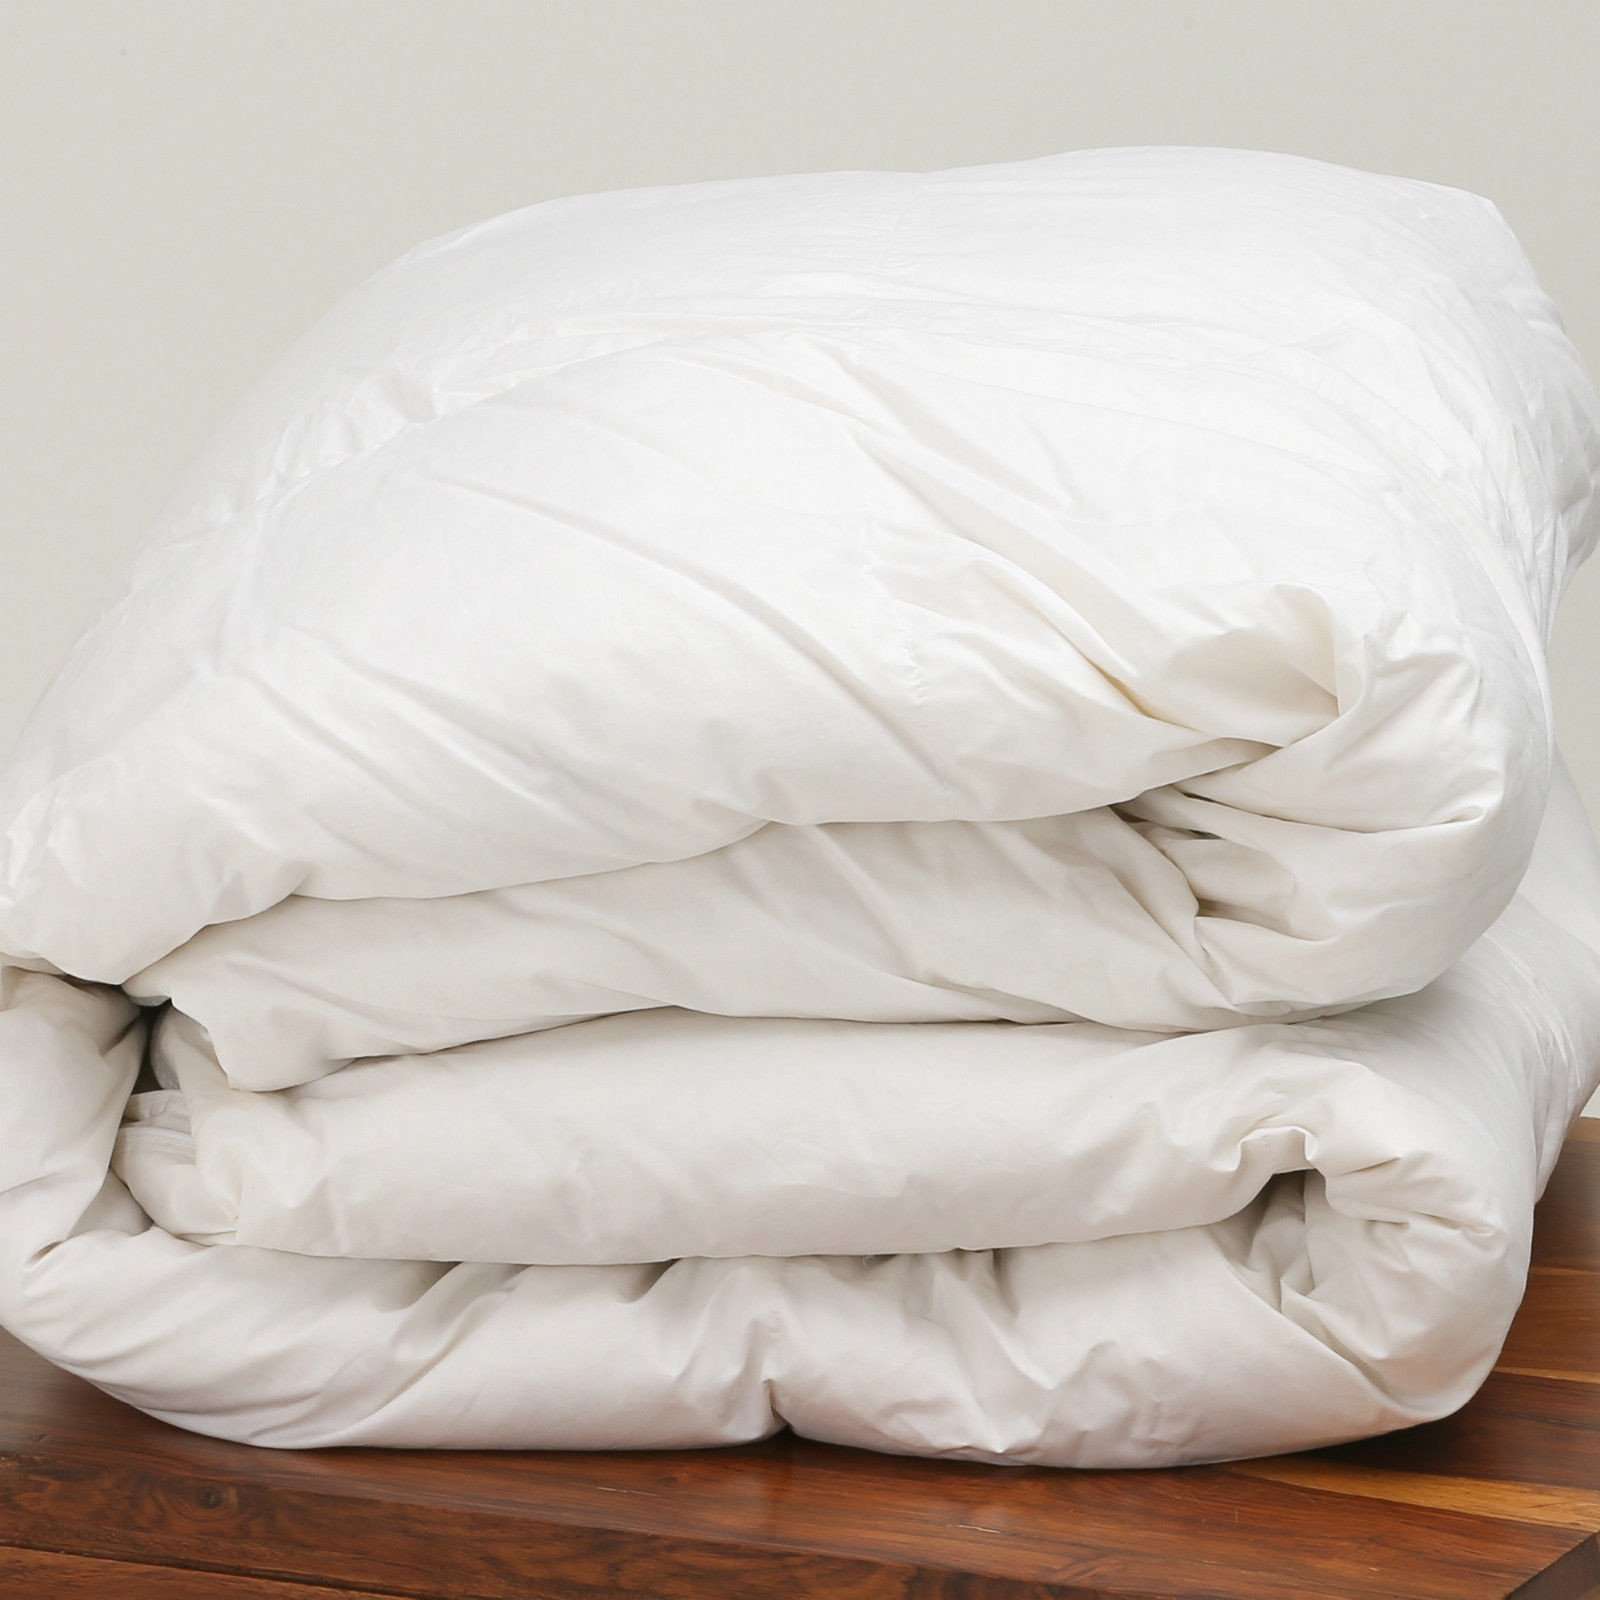 Stay-Cozy-Year-Round-with-Our-Hungarian-Goose-Down-Duvet